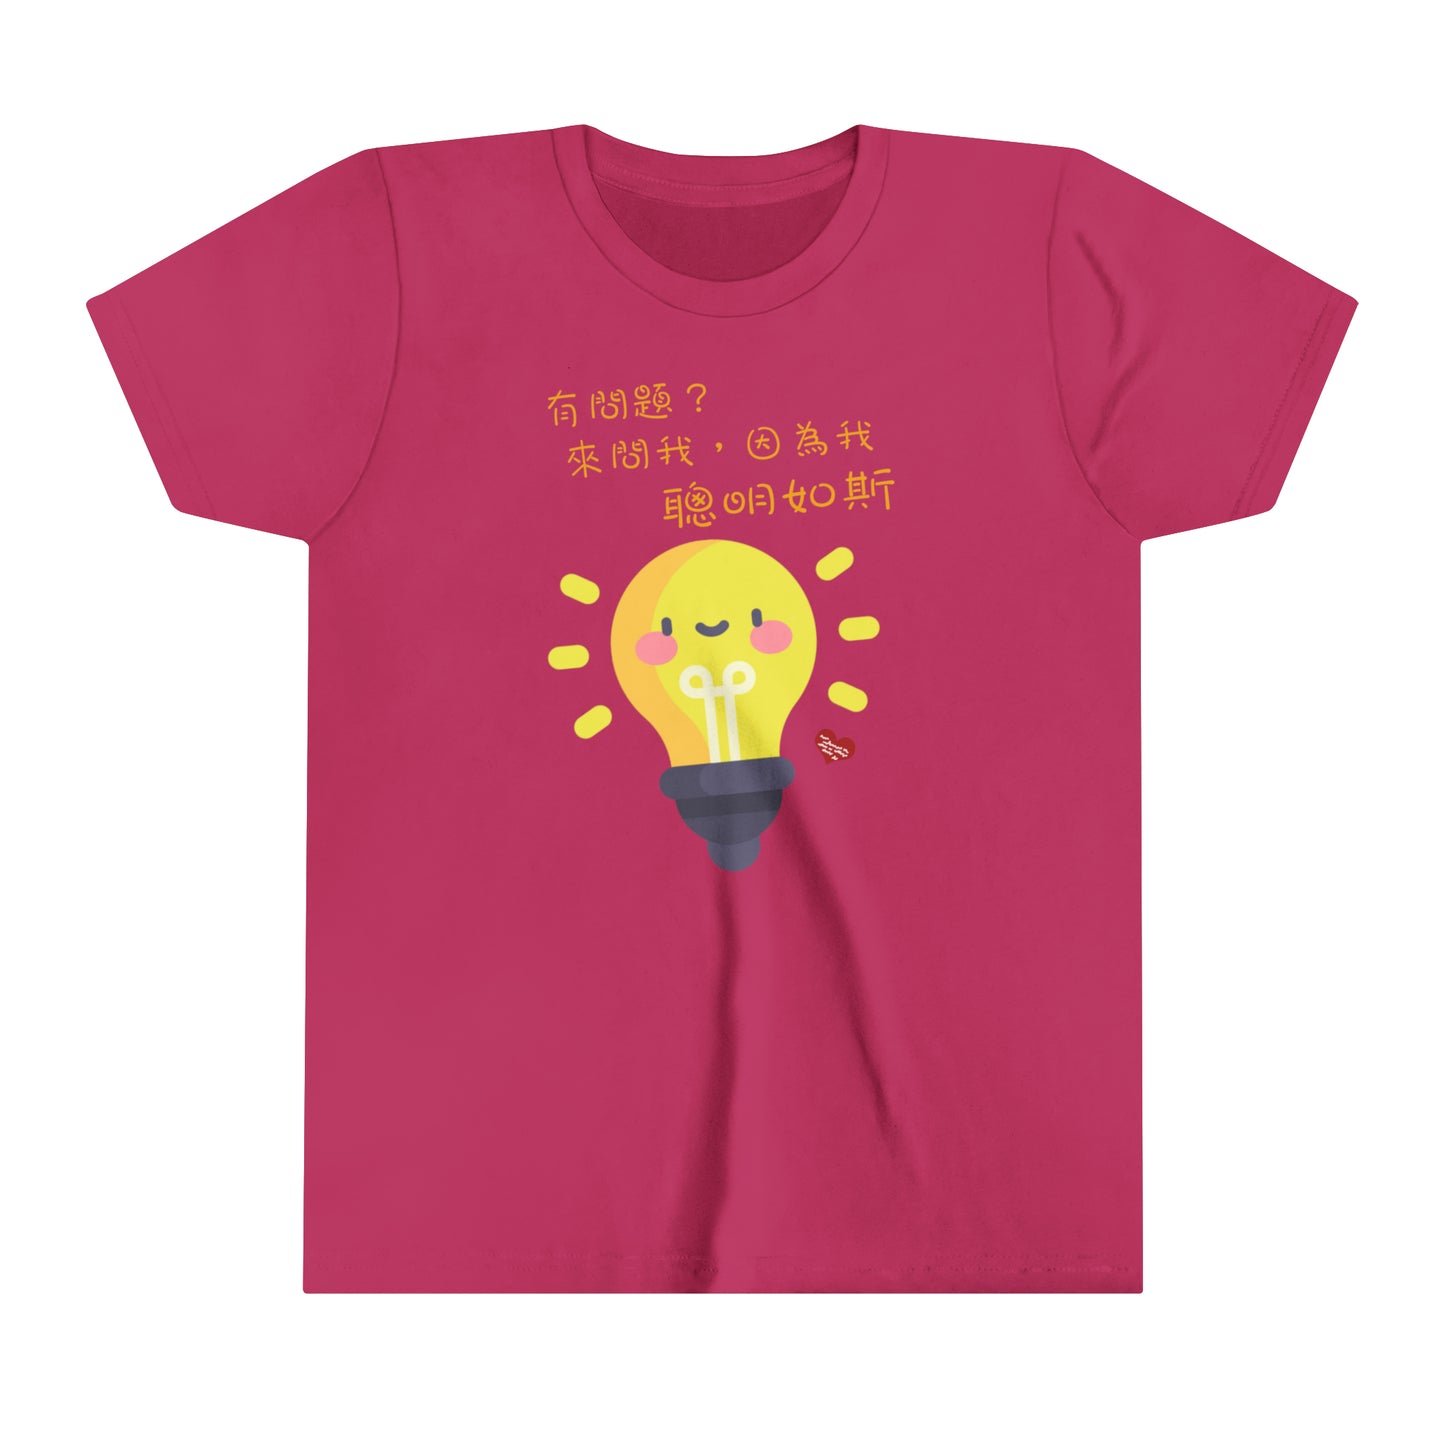 Kids Ask Me Anything Because I'm Smart Idioms T-shirts